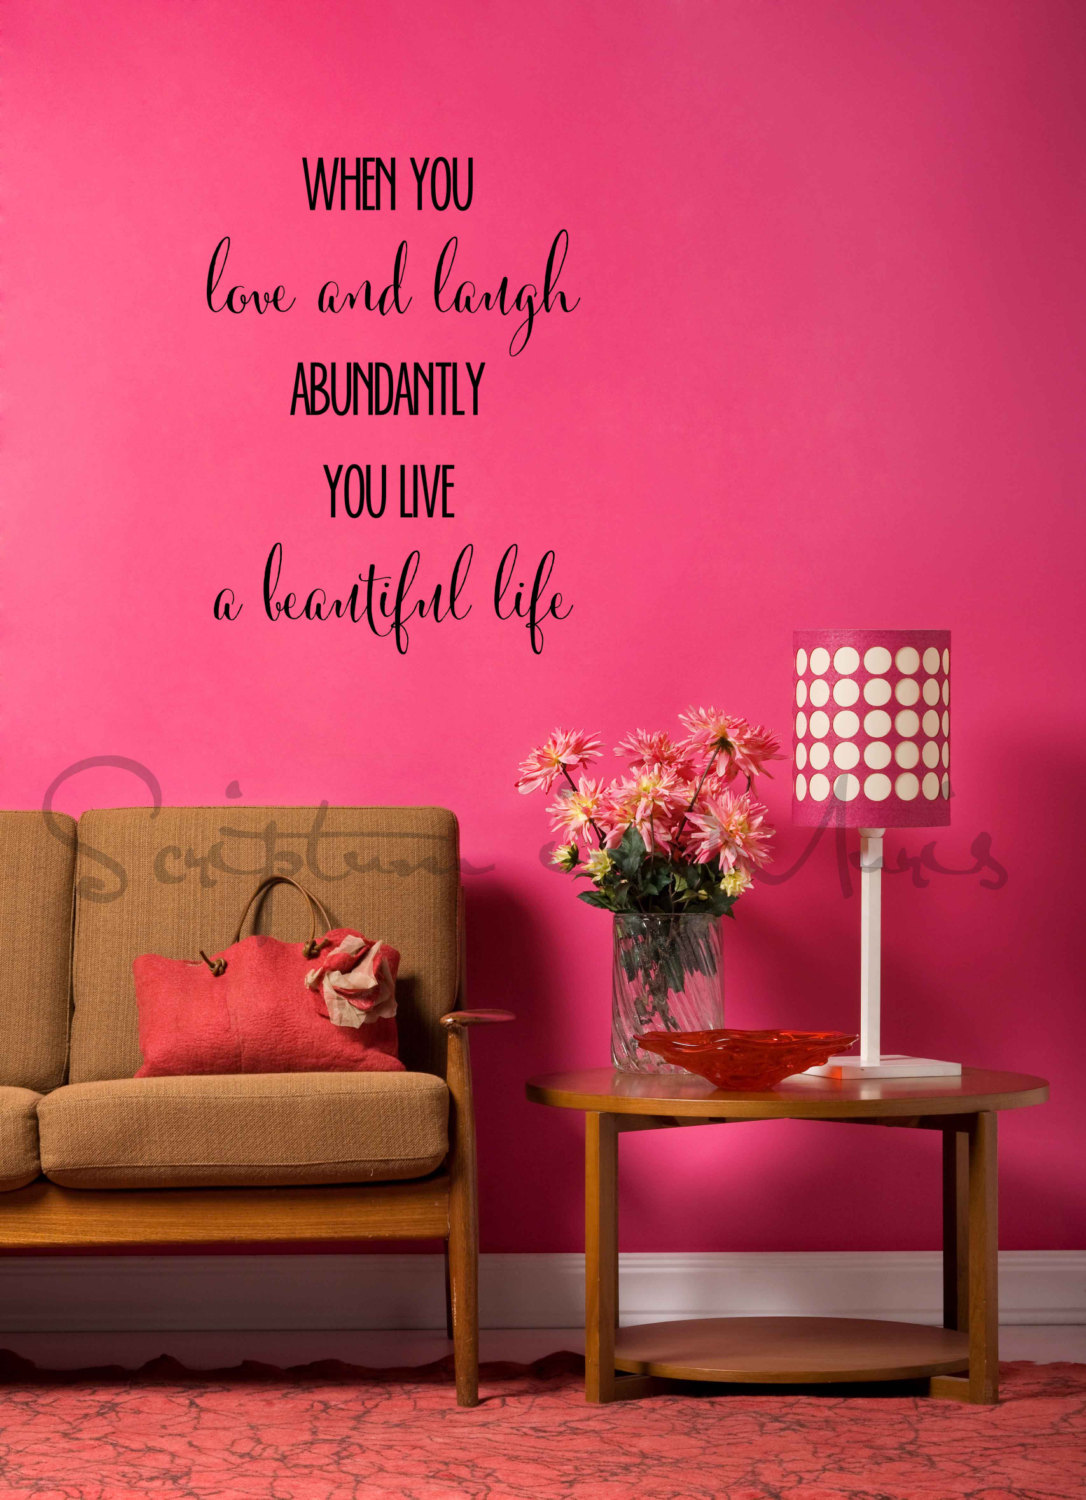 When You Love And Laugh Abundantly You Live A Beautiful Life Vinyl Decal